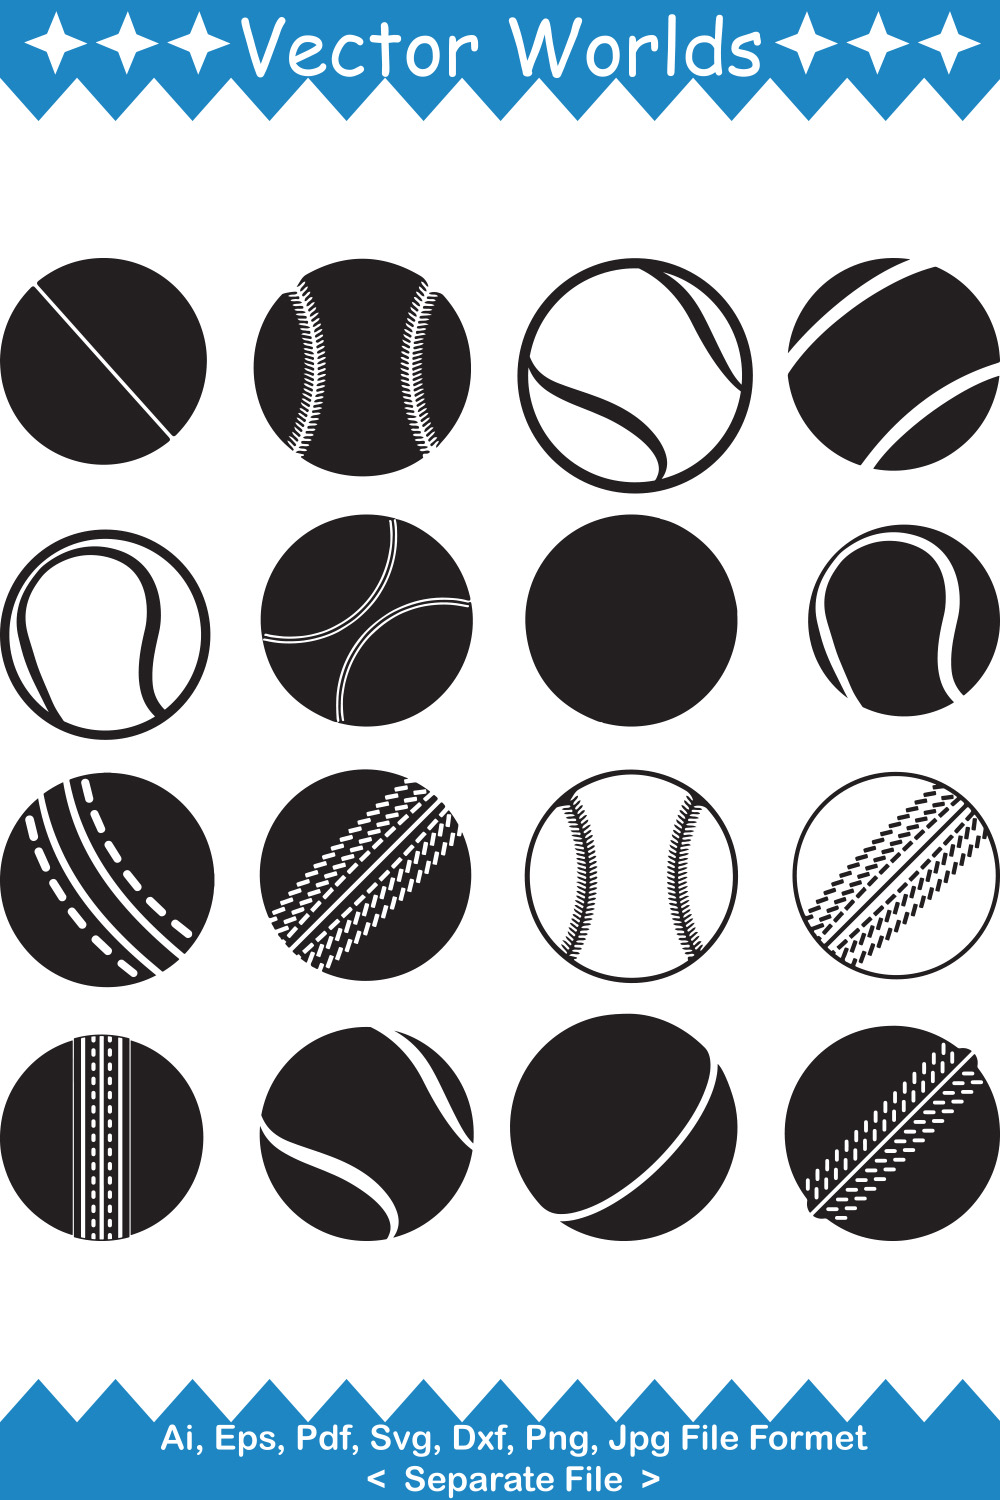 A pack of amazing images of cricket ball silhouettes.